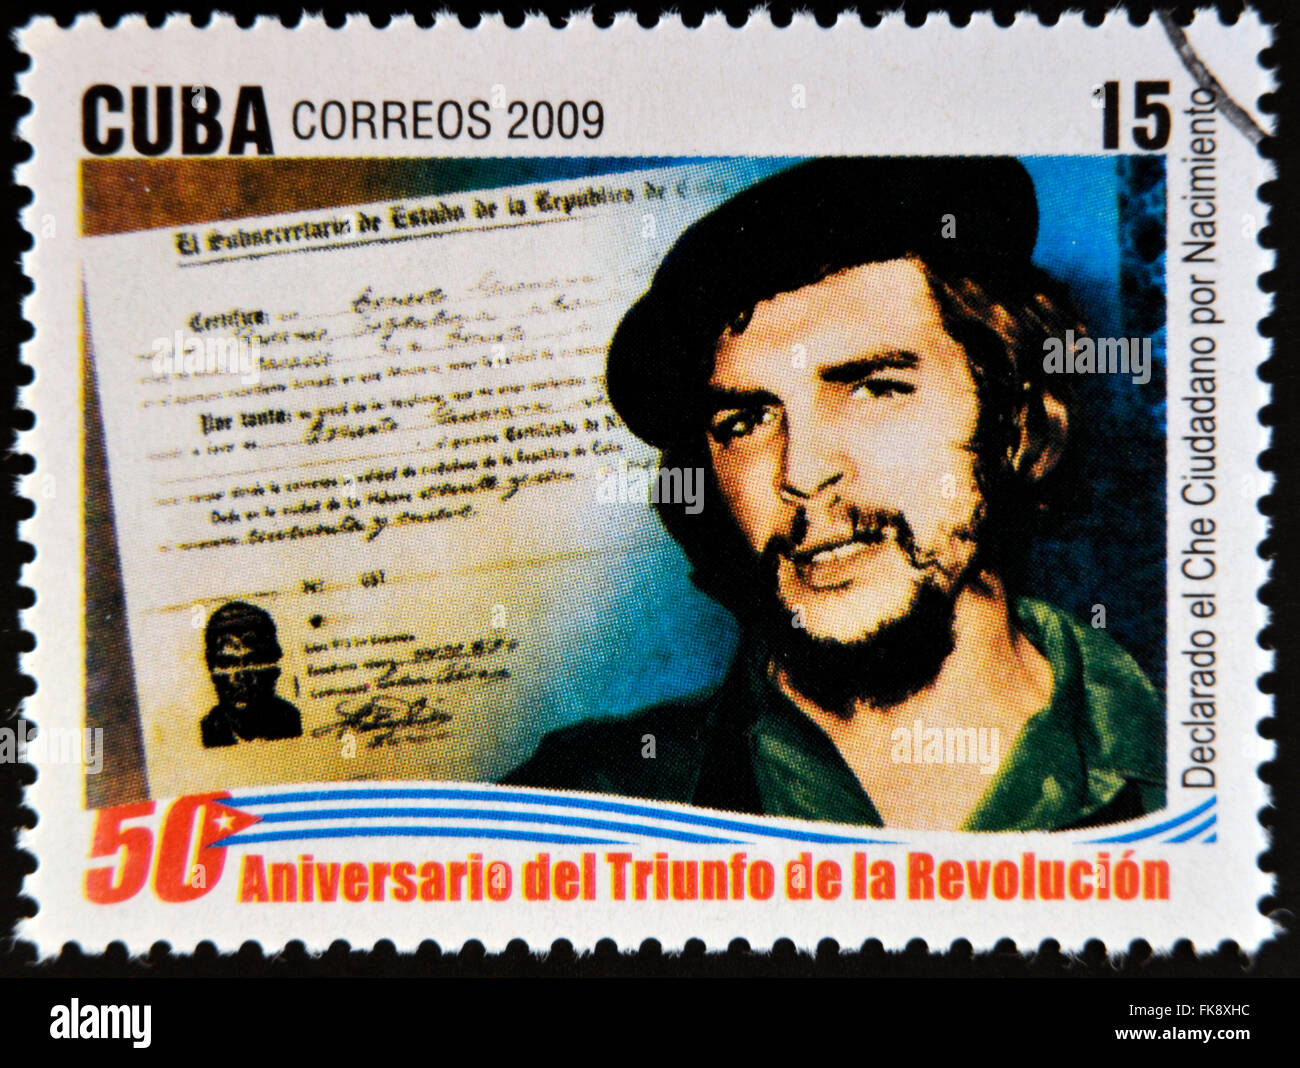 CUBA - CIRCA 2009: A stamp printed in cuba dedicated to 50 anniversary of the triumph of the revolution Stock Photo